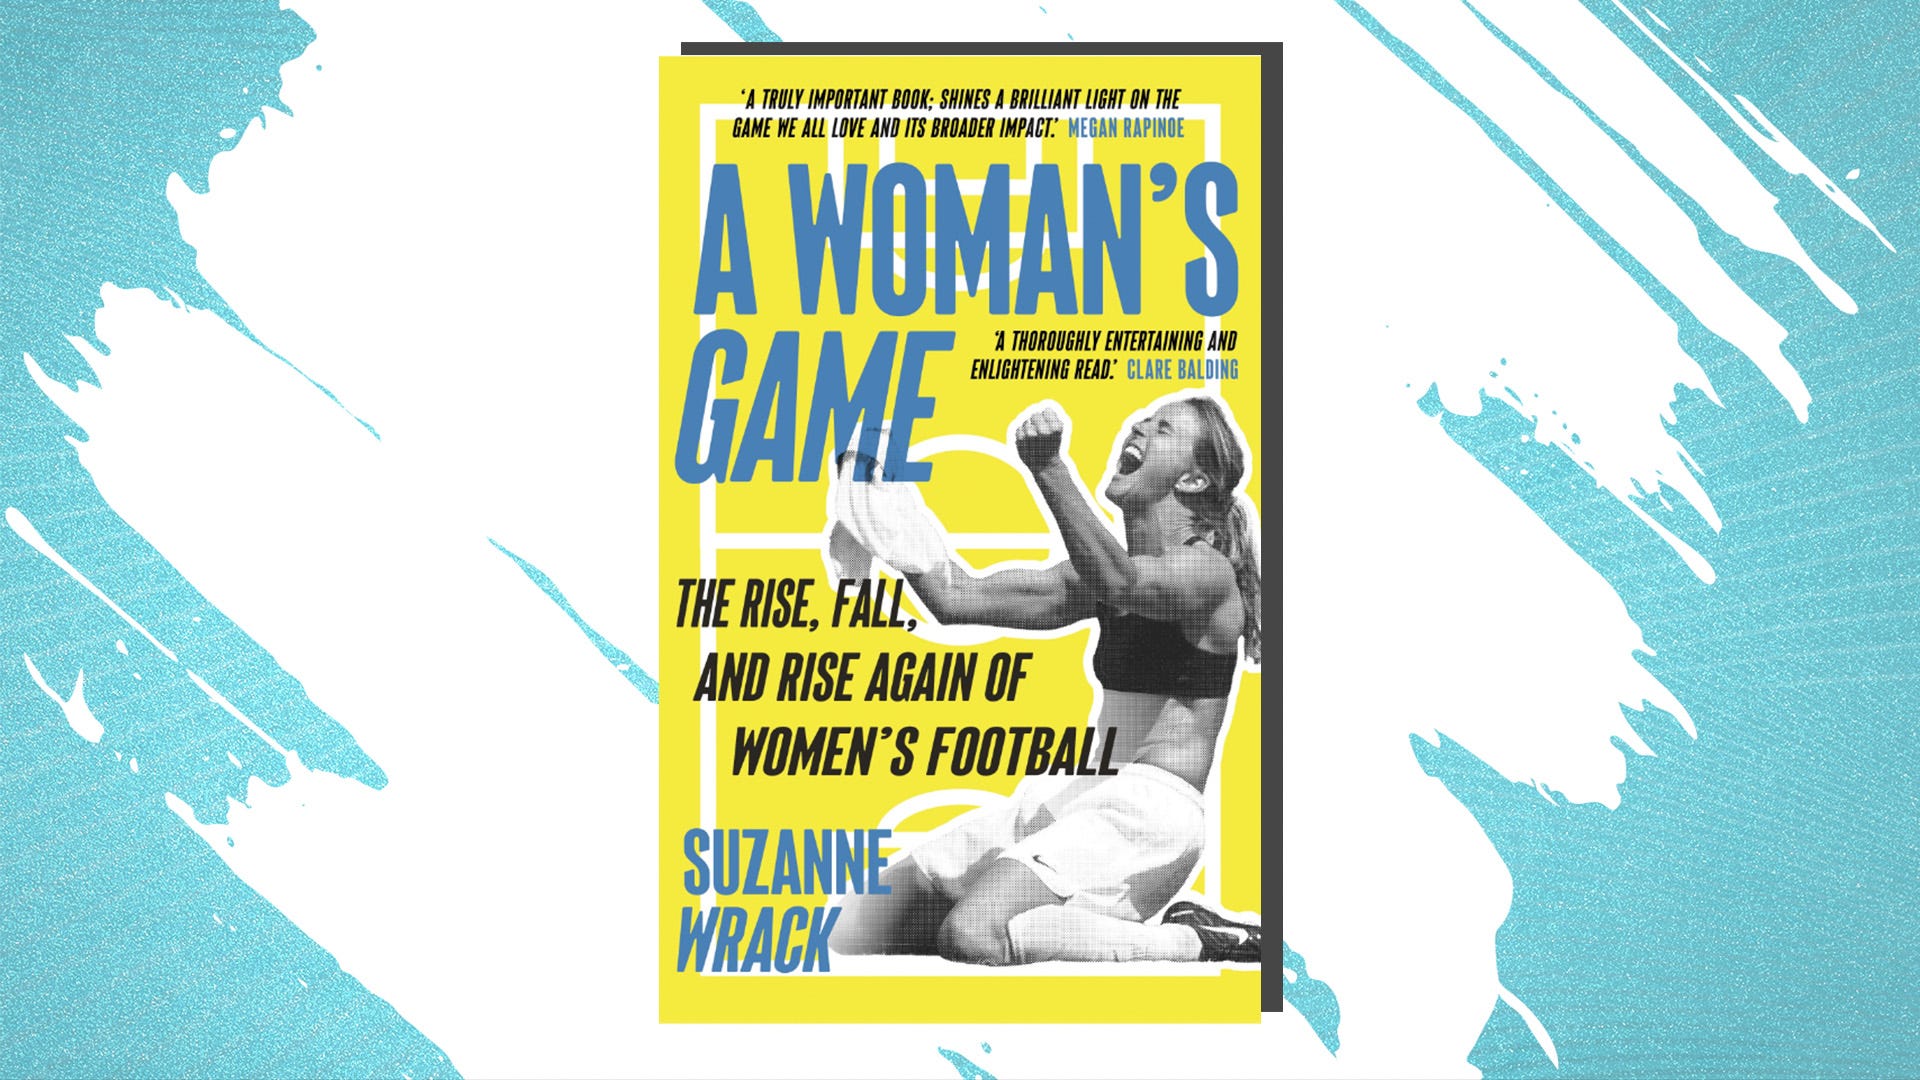 A woman's game book